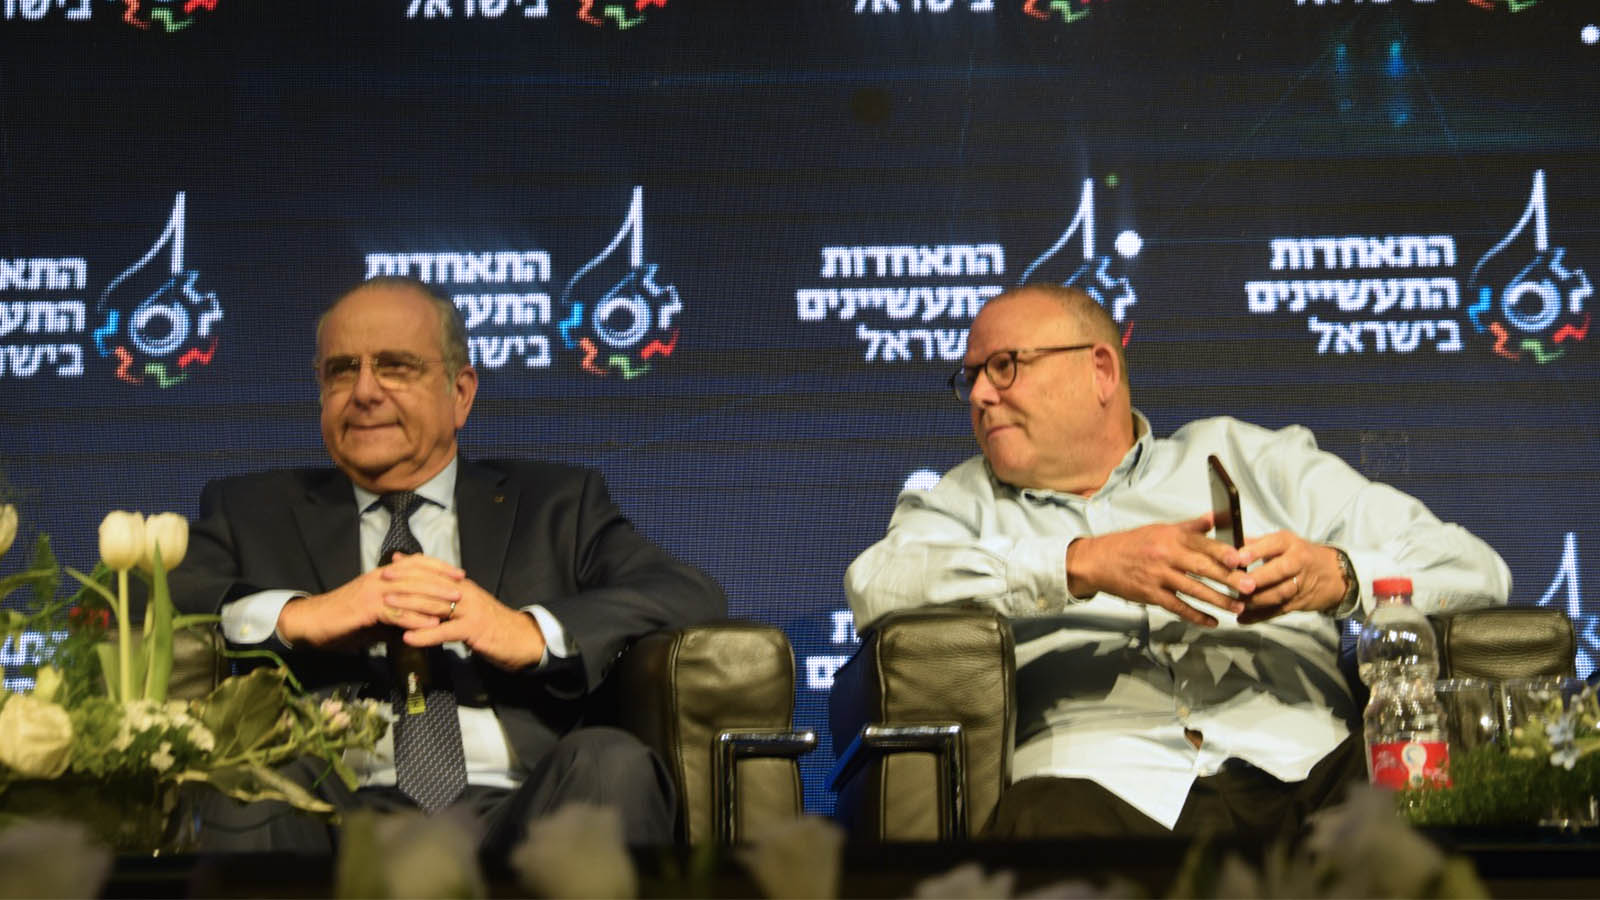 Histadrut Chairperson Arnon Bar-David and Shraga Brosh, outgoing chairman of the Manufacturer's Association at the Israeli Manufacturing Conference, Dec. 2, 2019 (Photograph: Omer Cohen)